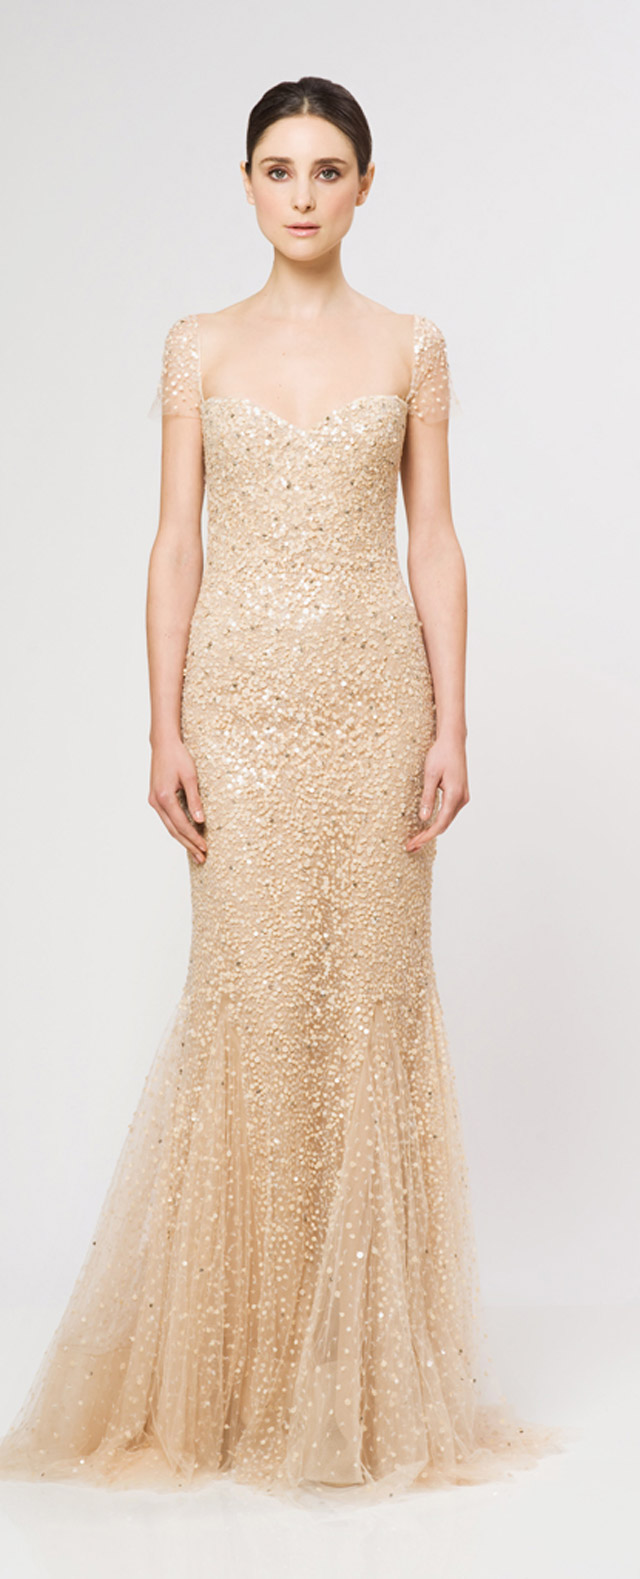 Reem Acra Ready To Wear Spring 2013 Collection (19)